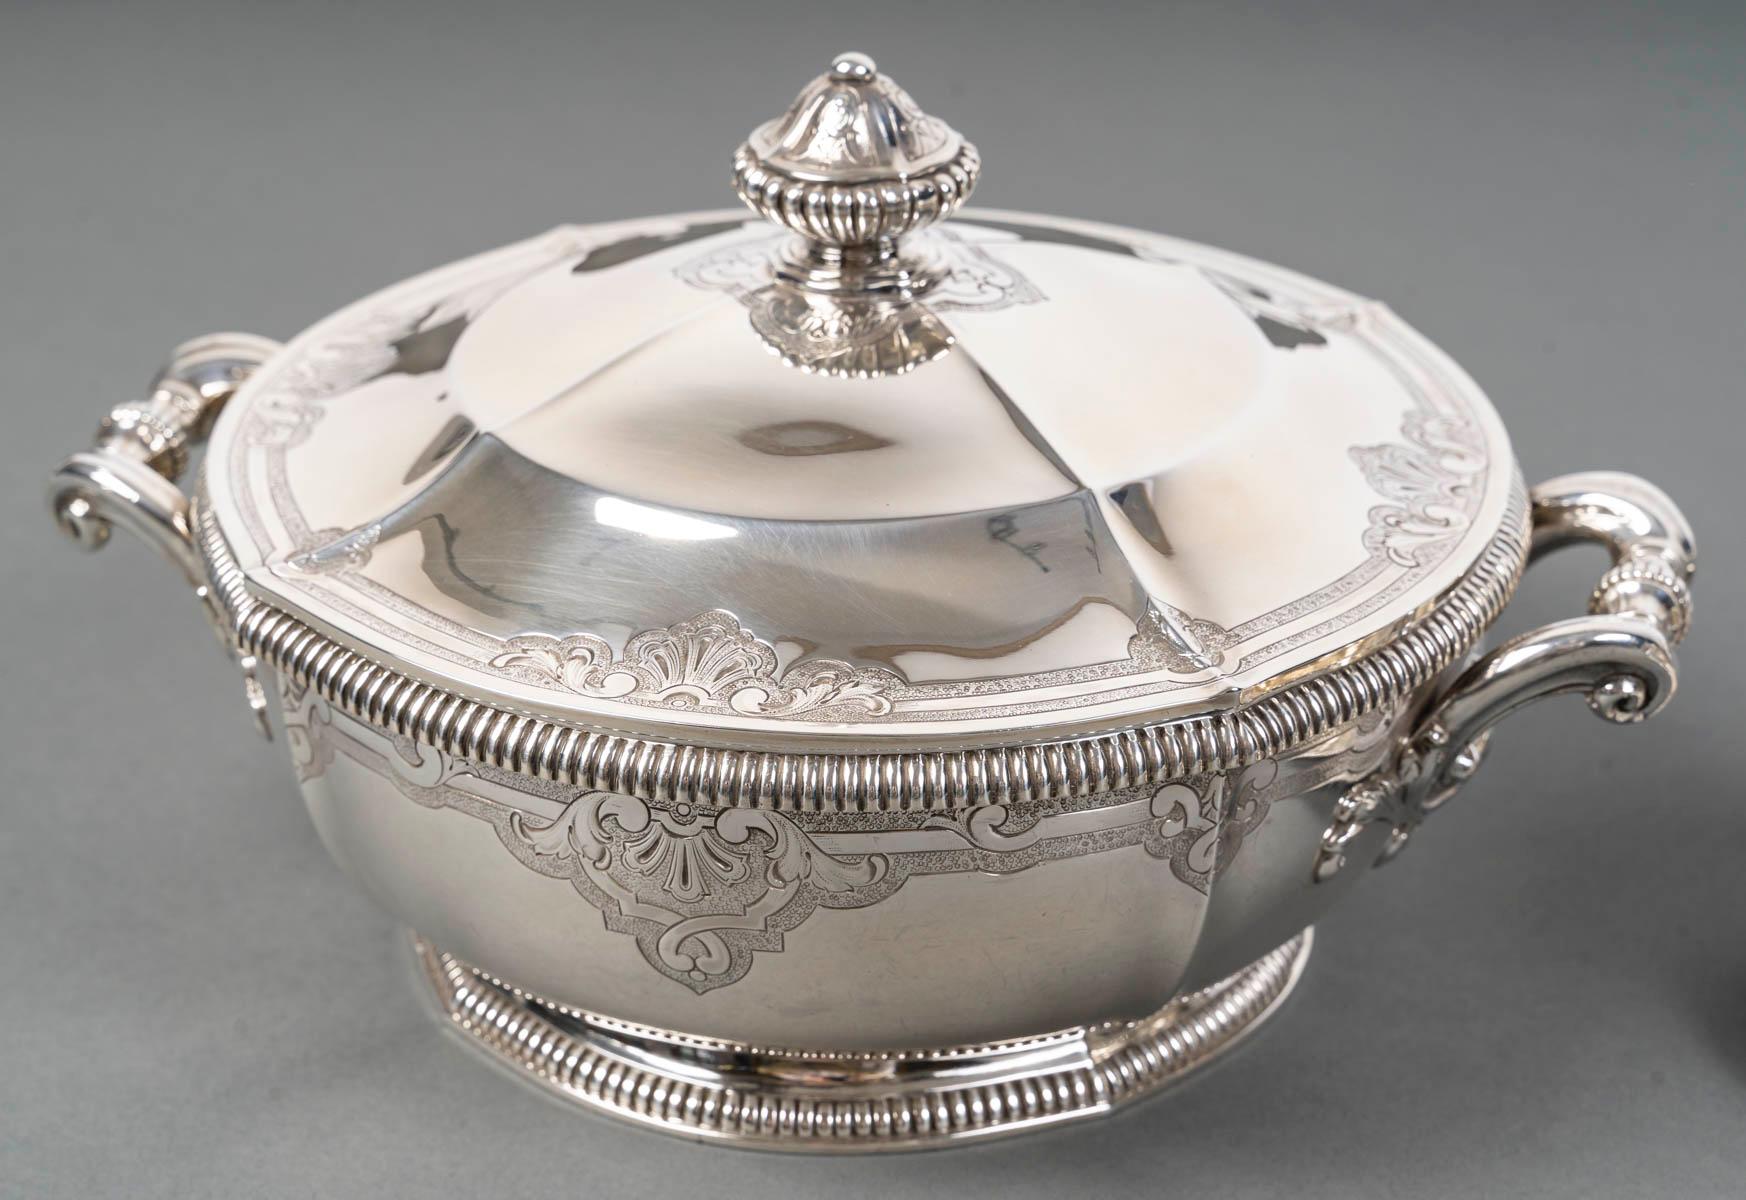 Silver table set consisting of a vegetable dish and a sauce boat. Decor of gadroons and a Bérain engraving on a matte background. The handles of the vegetable dishes are rolled up.

Dimensions

- Vegetable dish: 21.5cm in diameter, 15.5cm in